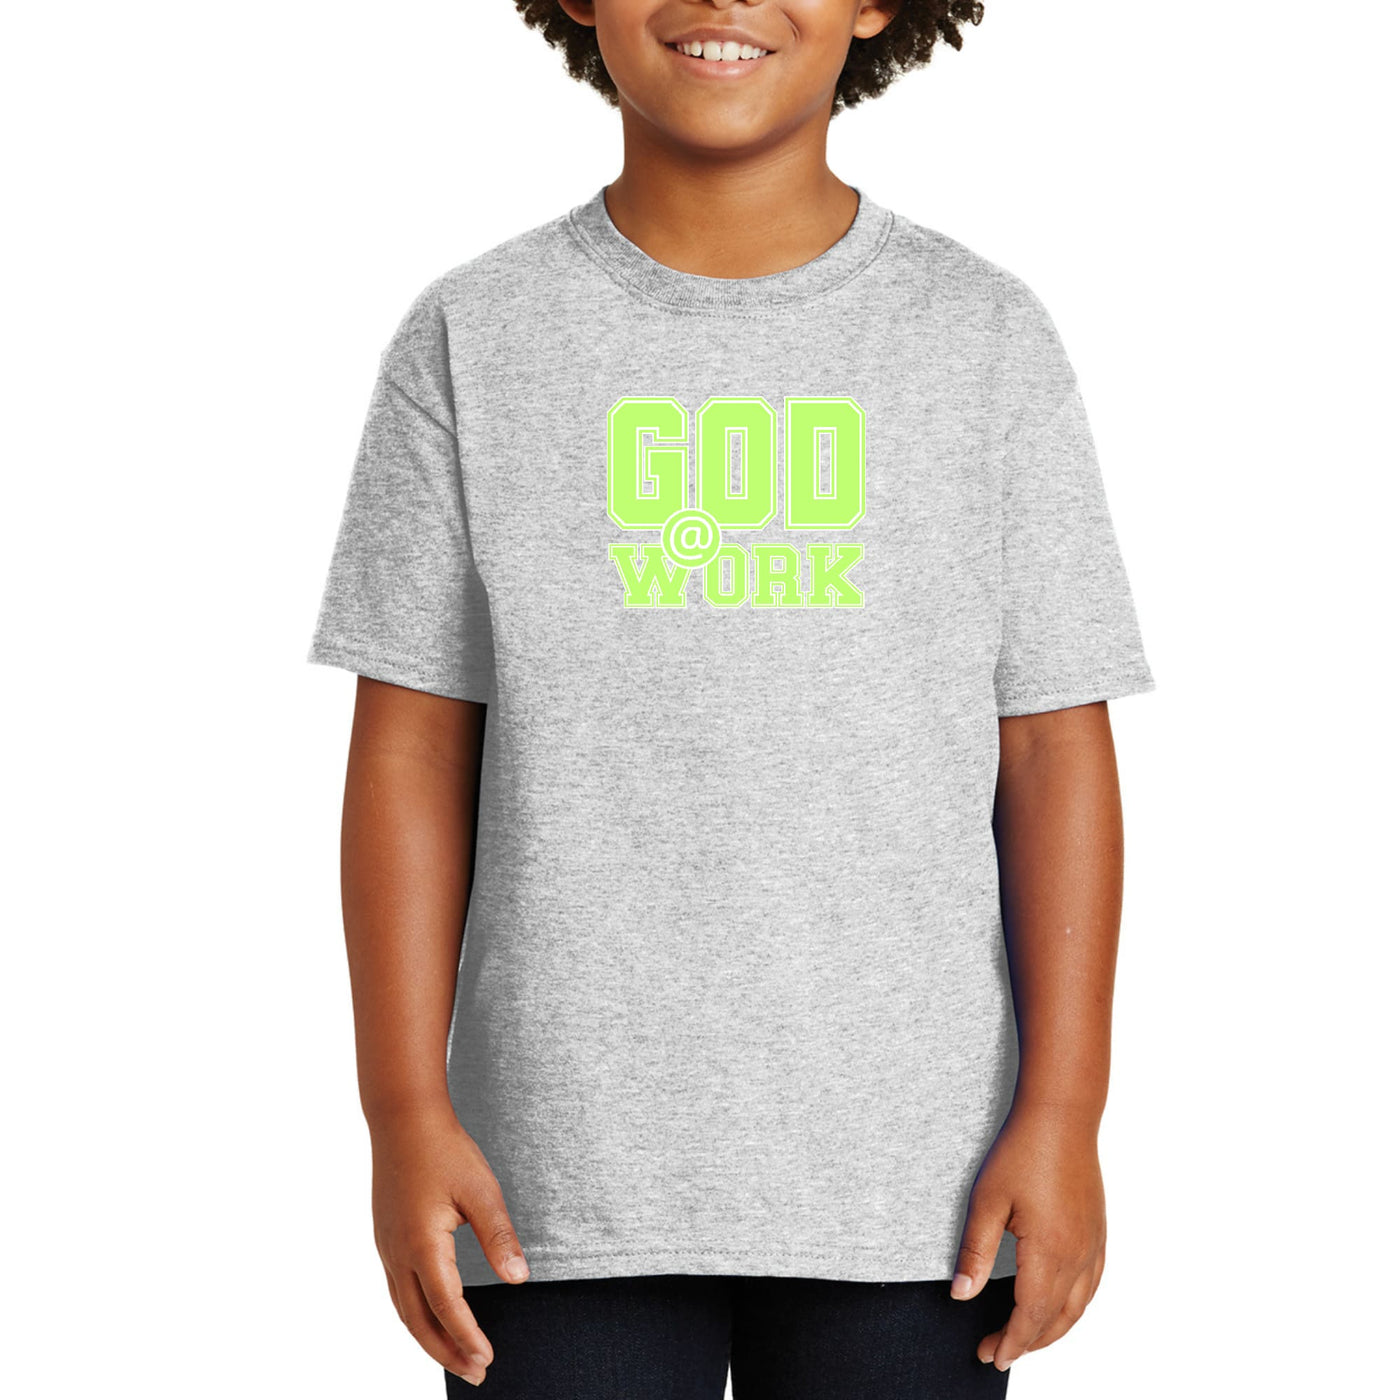 Youth Short Sleeve Graphic T-shirt God @ Work Neon Green And White - Youth